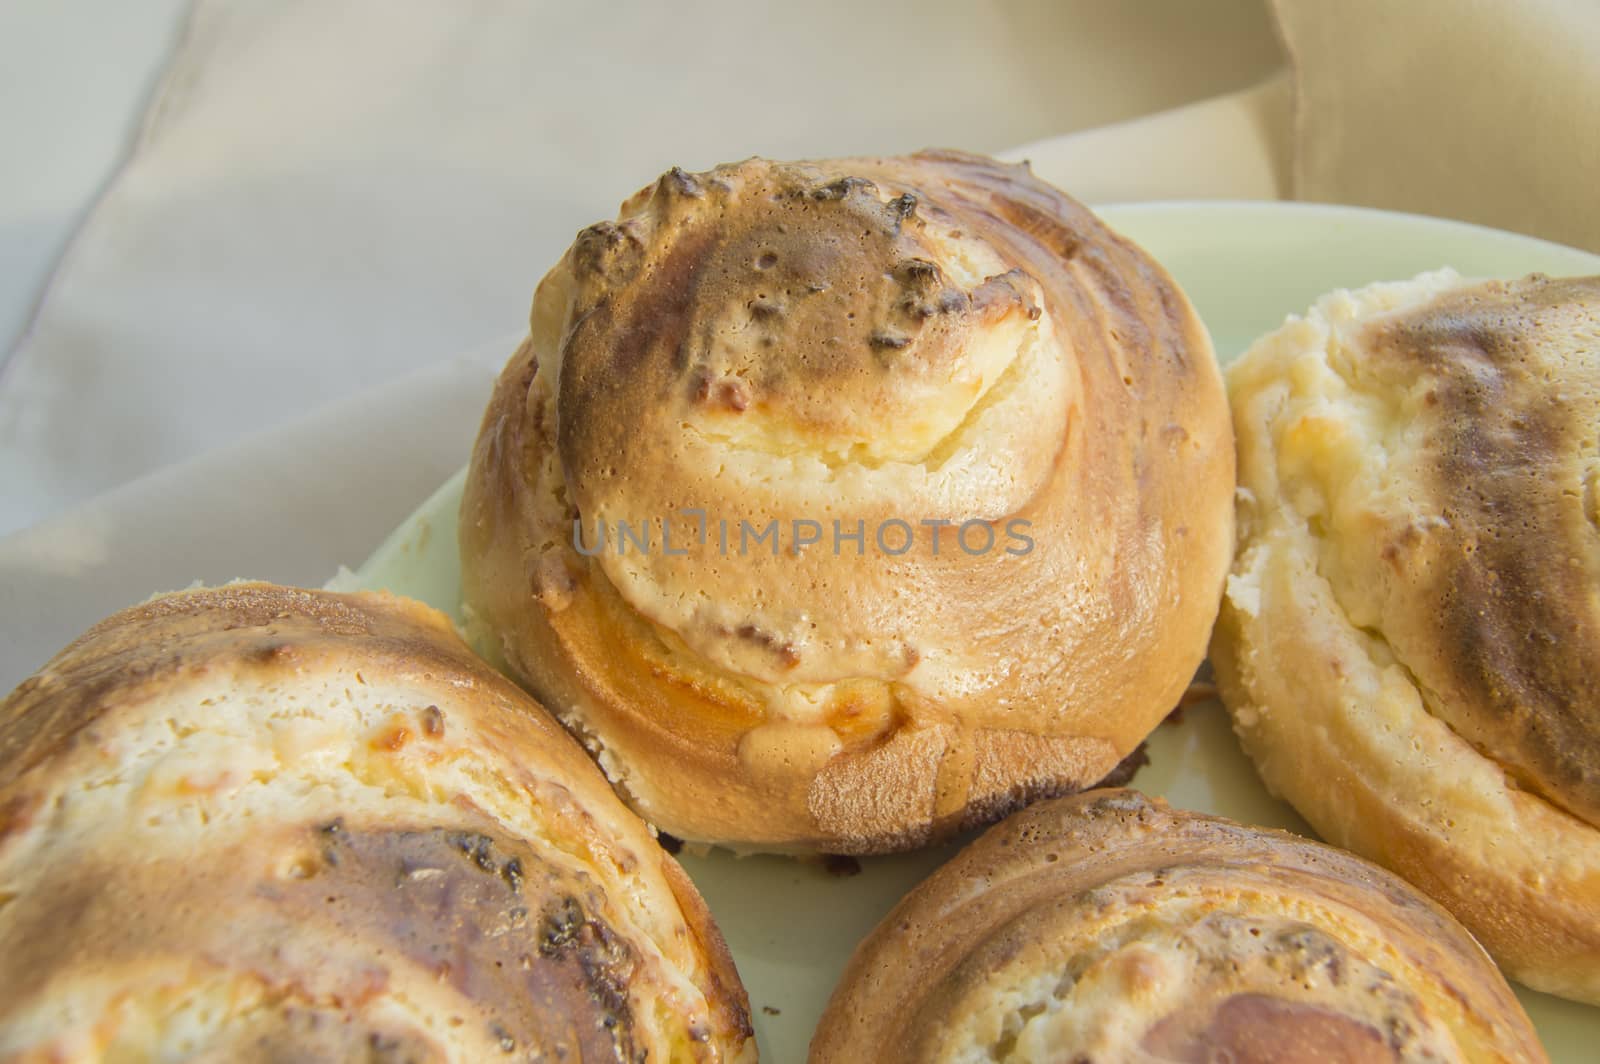 Hot sweet rolls in the shape of snails baked in a homemade bakery, closeup, concept of small business, bakeries, mini-hotel.